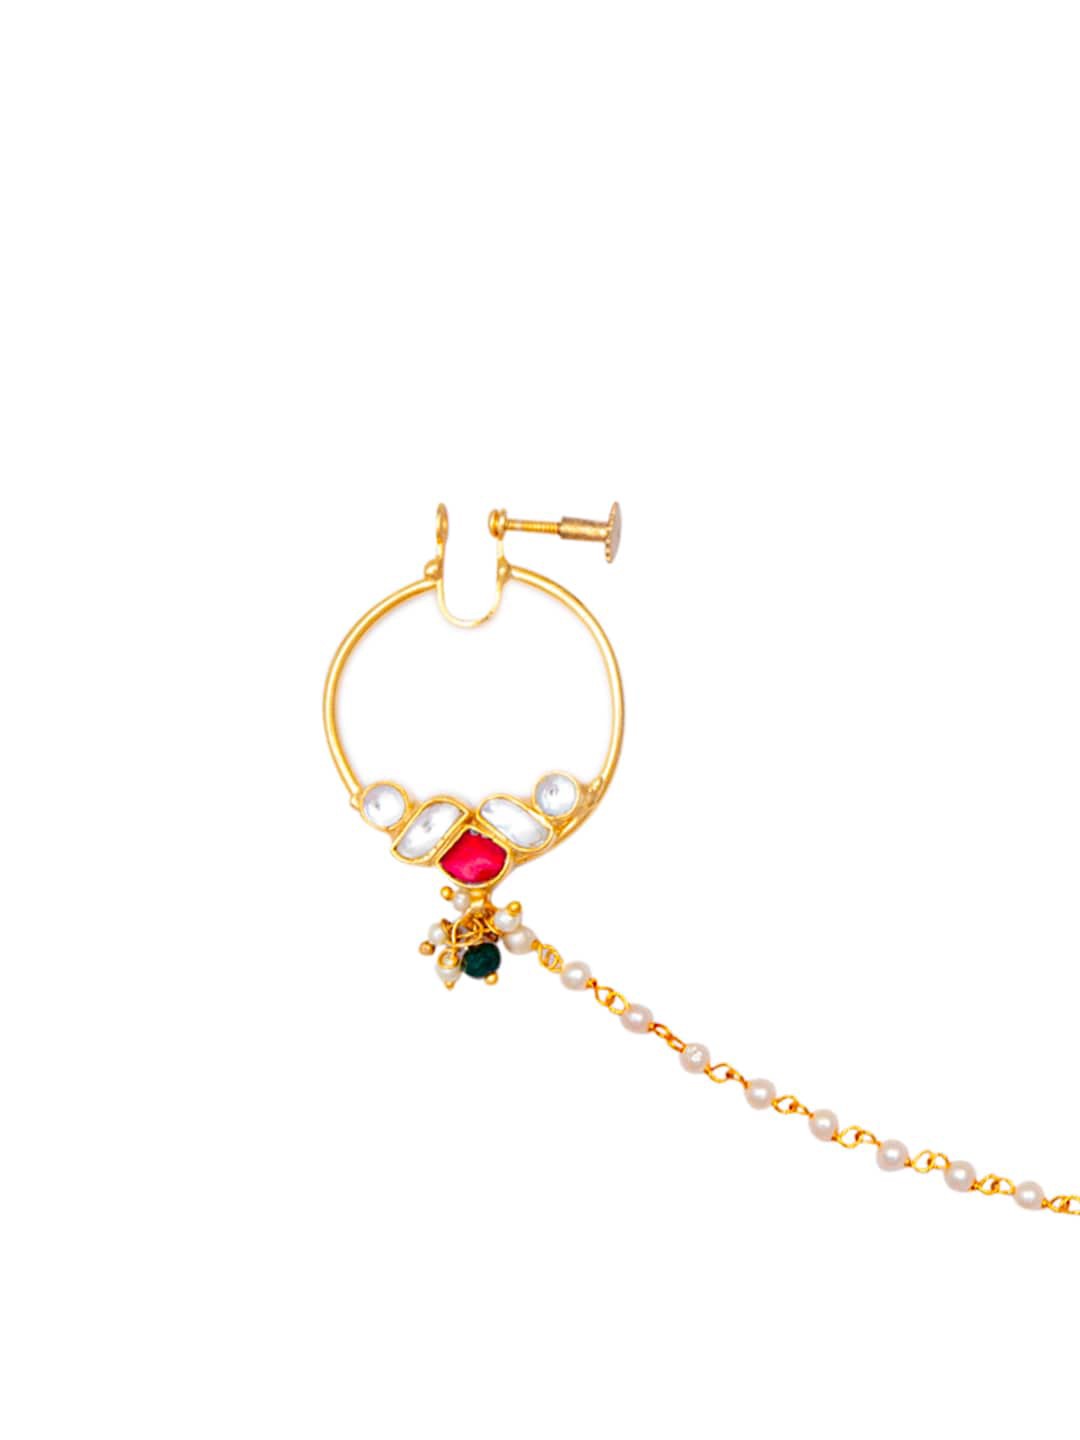 Women's Gold-Plated White & Red Kundan-Studded Beaded Handcrafted Nose Ring With Chain - Morkanth